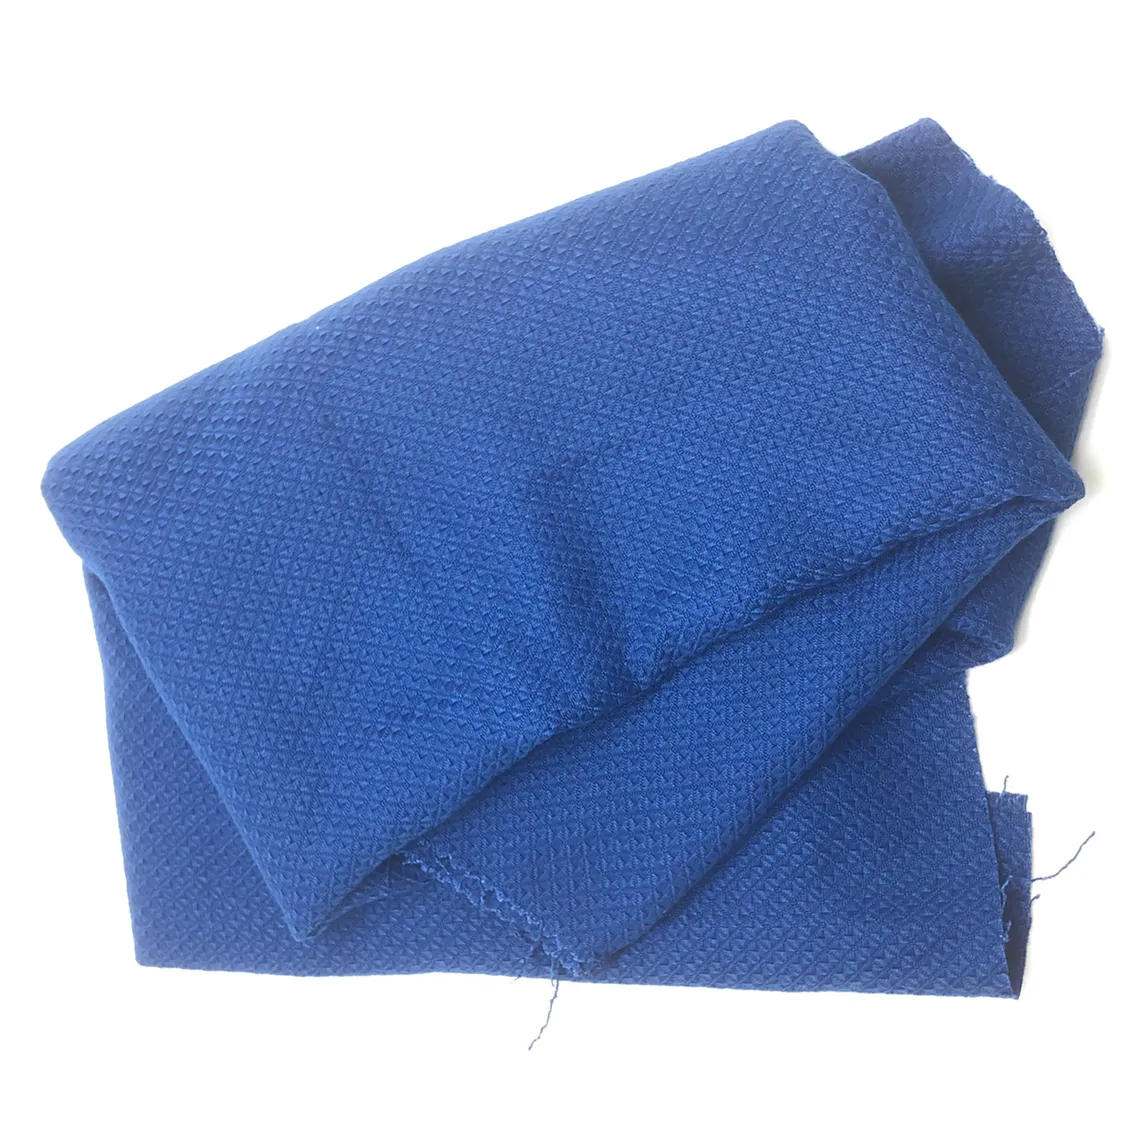 Blue Aramid Knitted Flame Retardant Fabric for Workwear Functional Textile